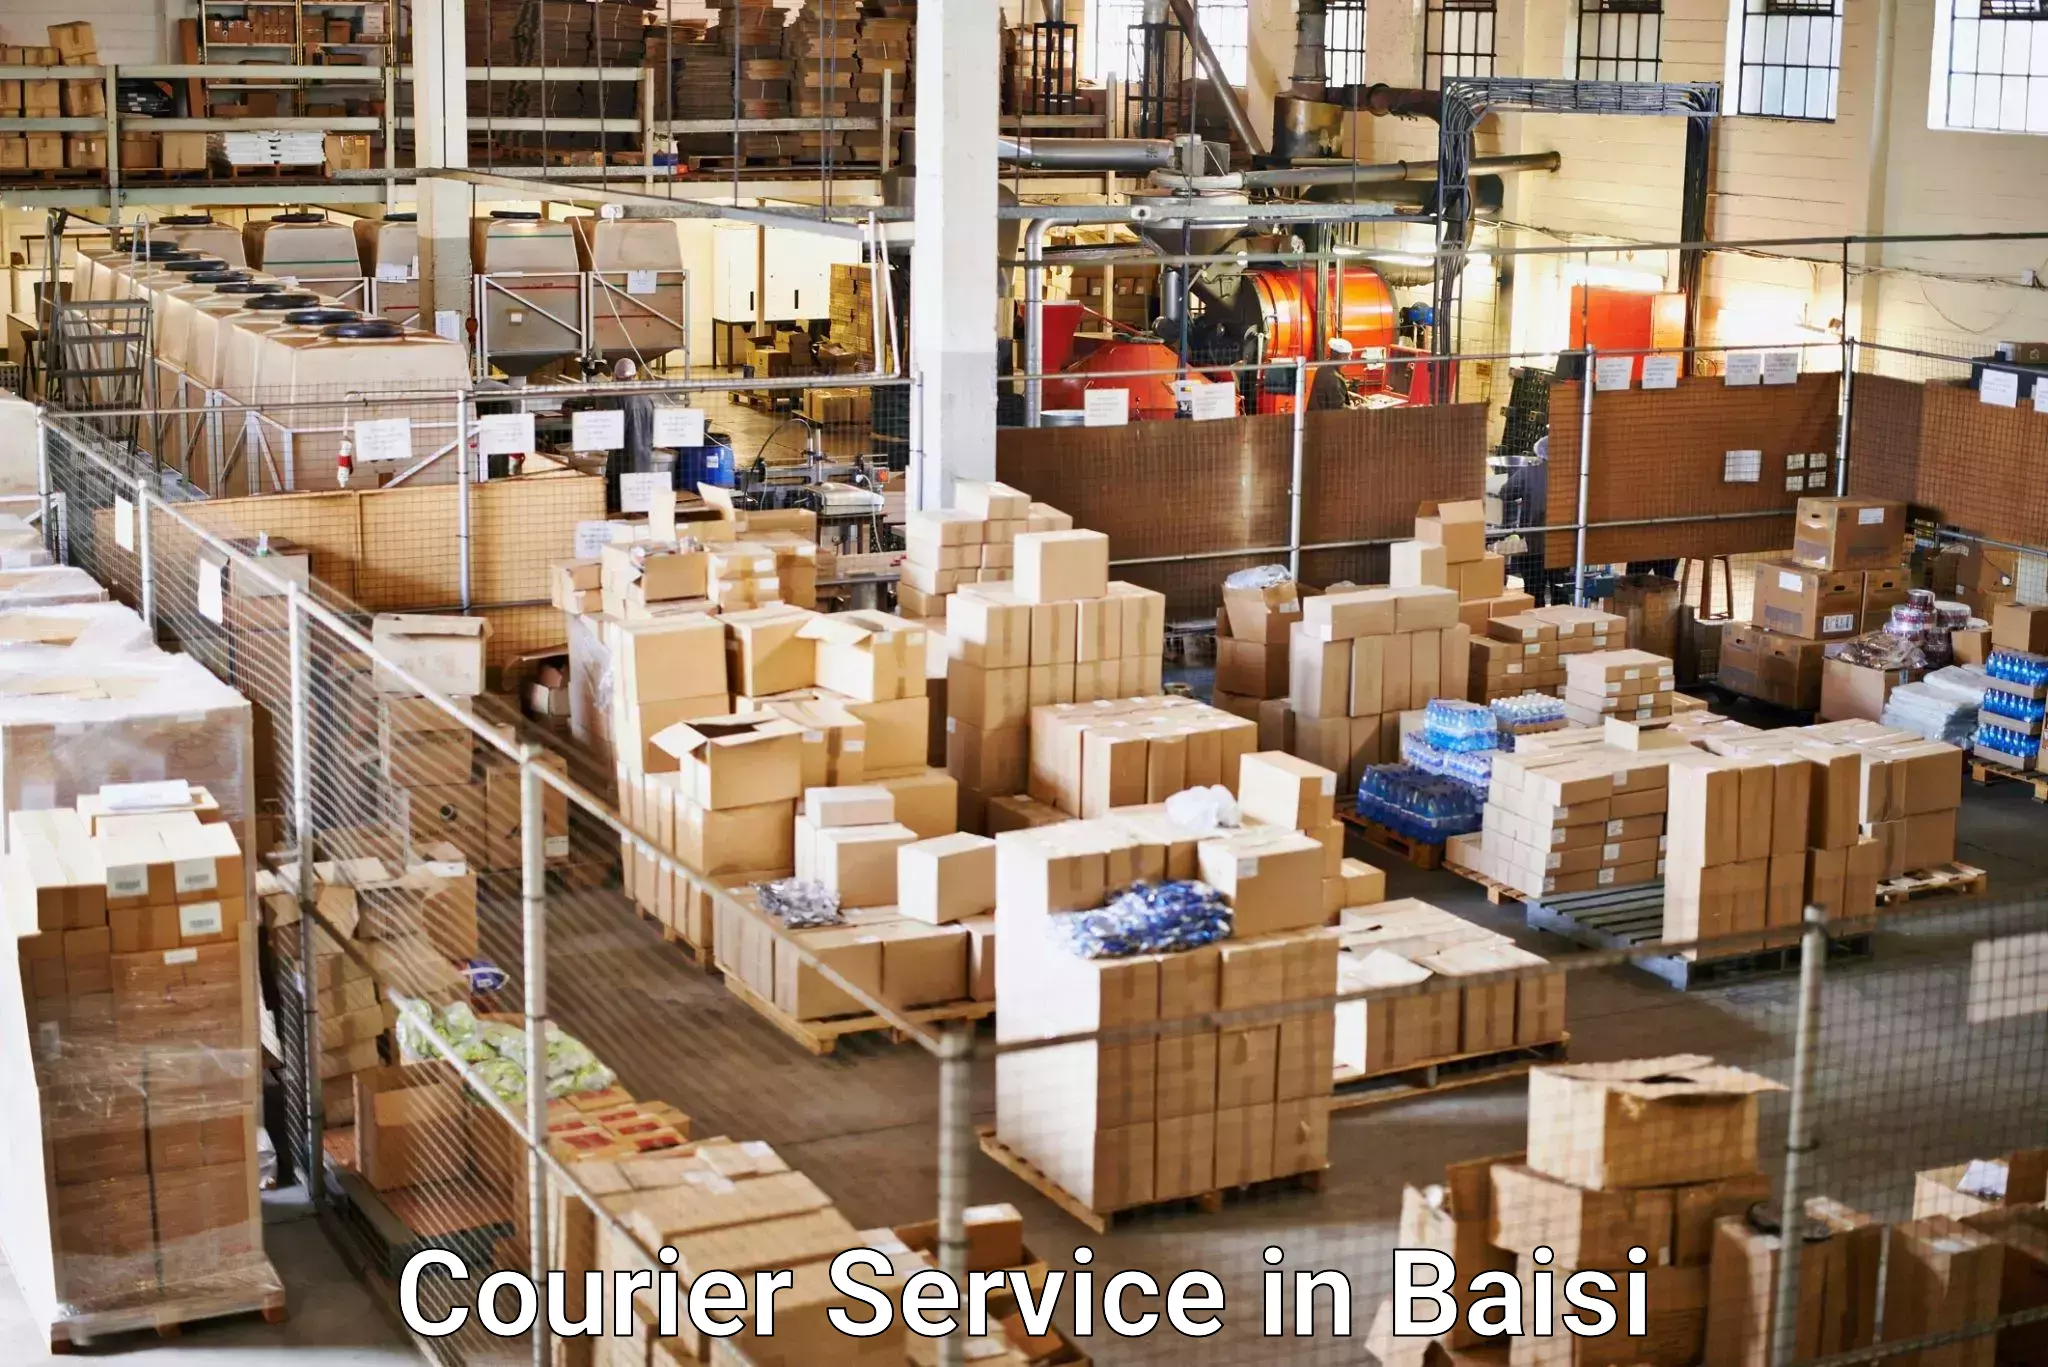 Specialized shipment handling in Baisi